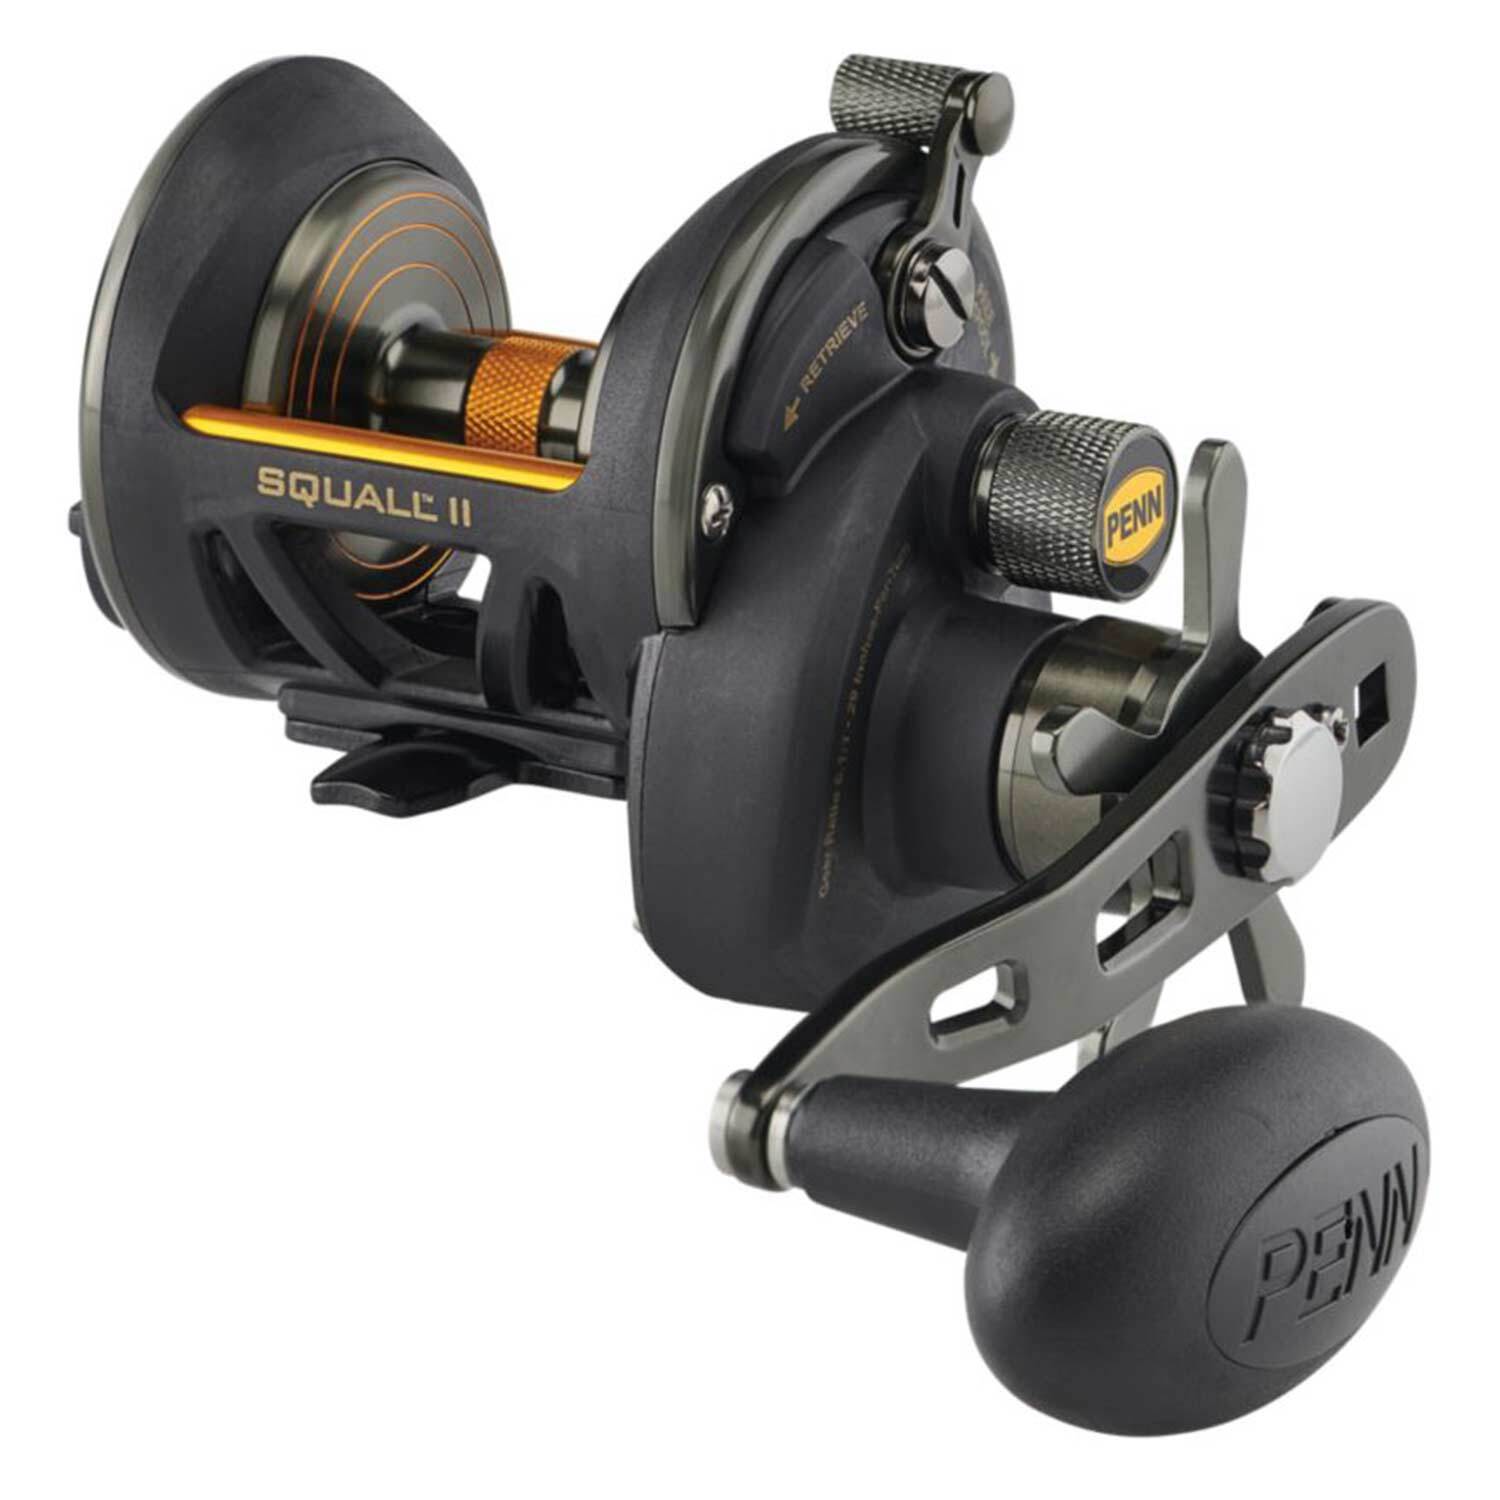 PENN Squall II 12 Star Drag Left-Hand Conventional Reel